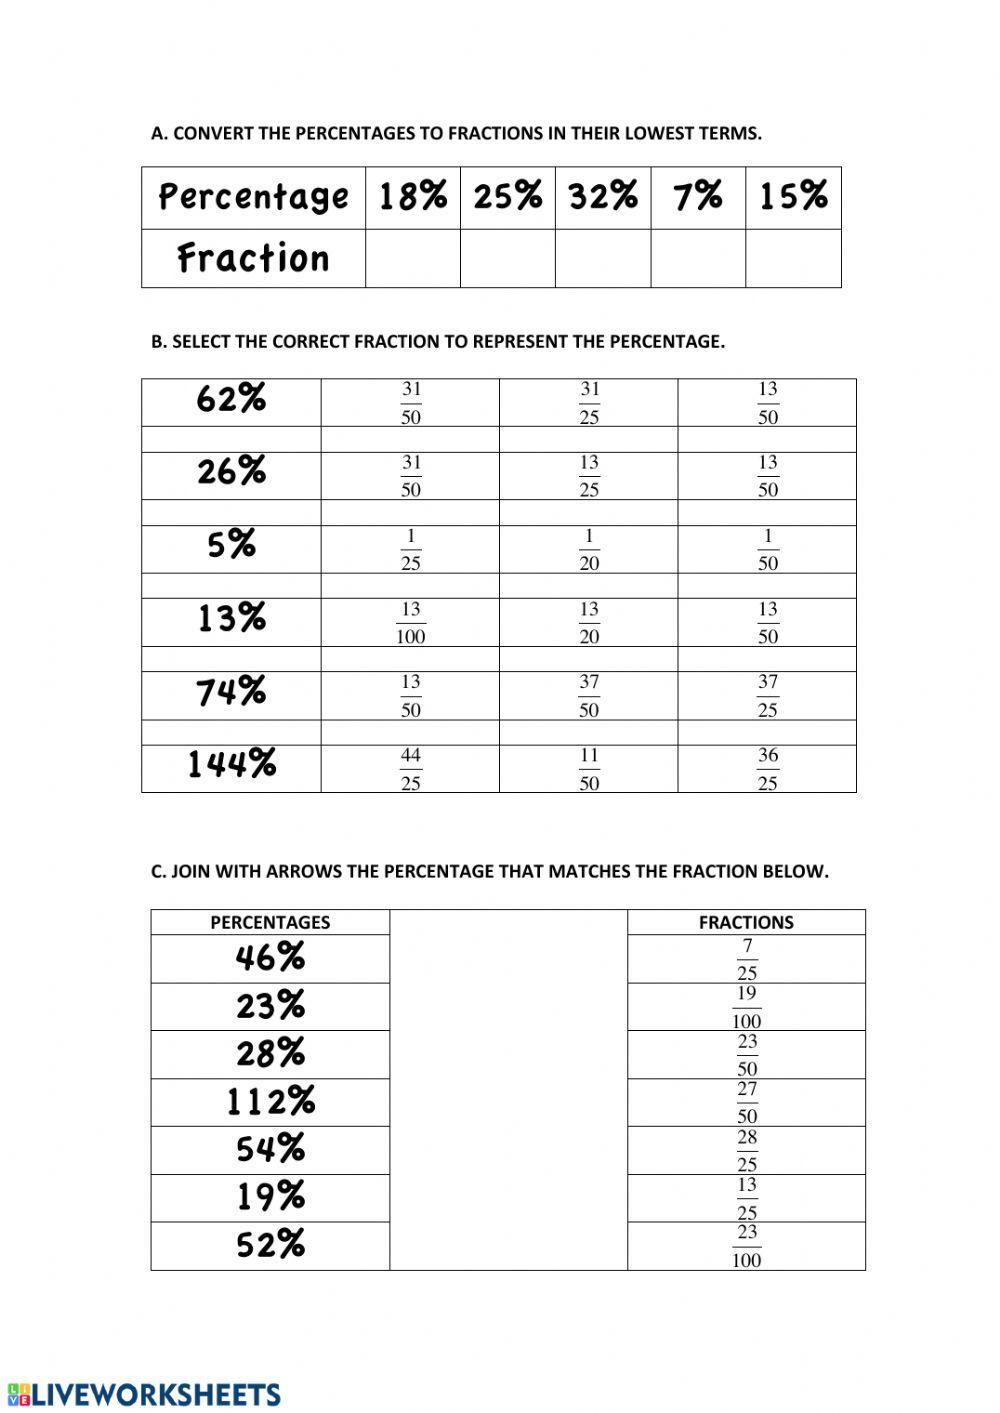 Converting Percentages to Fractions